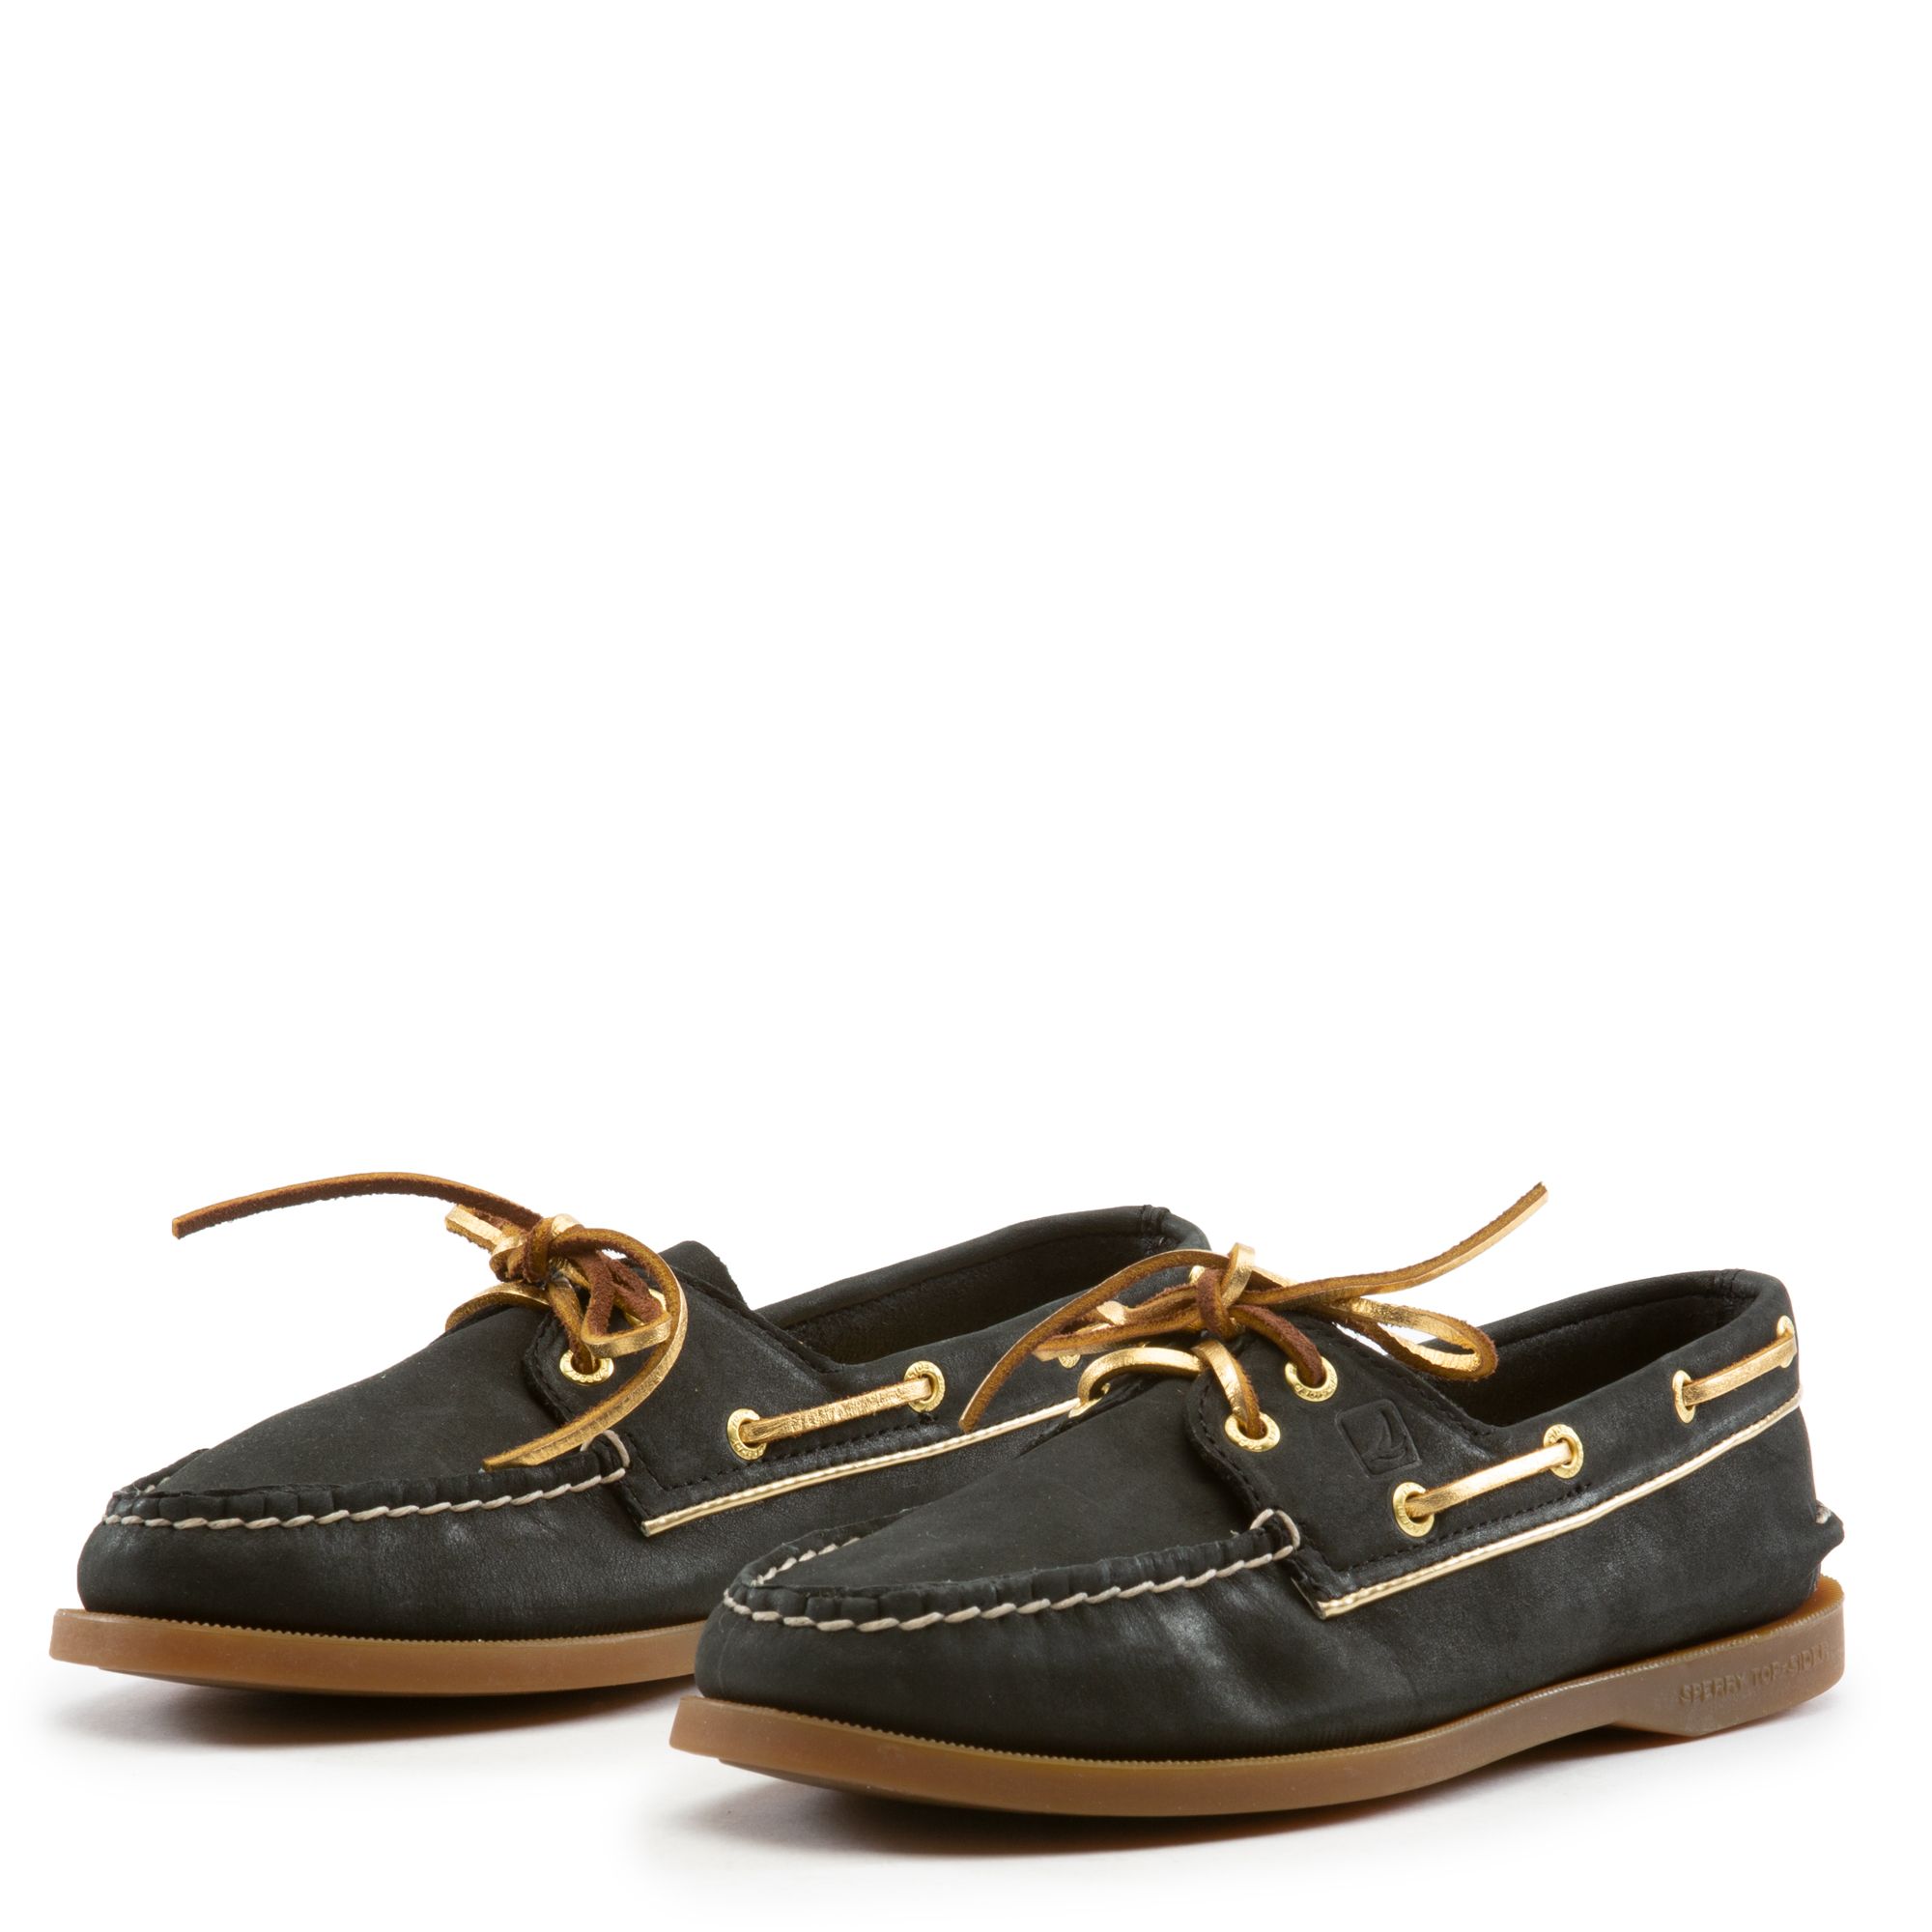 SPERRY TOP-SIDER Sperry Topsider A/O Black Gold Piping Boat Shoe 